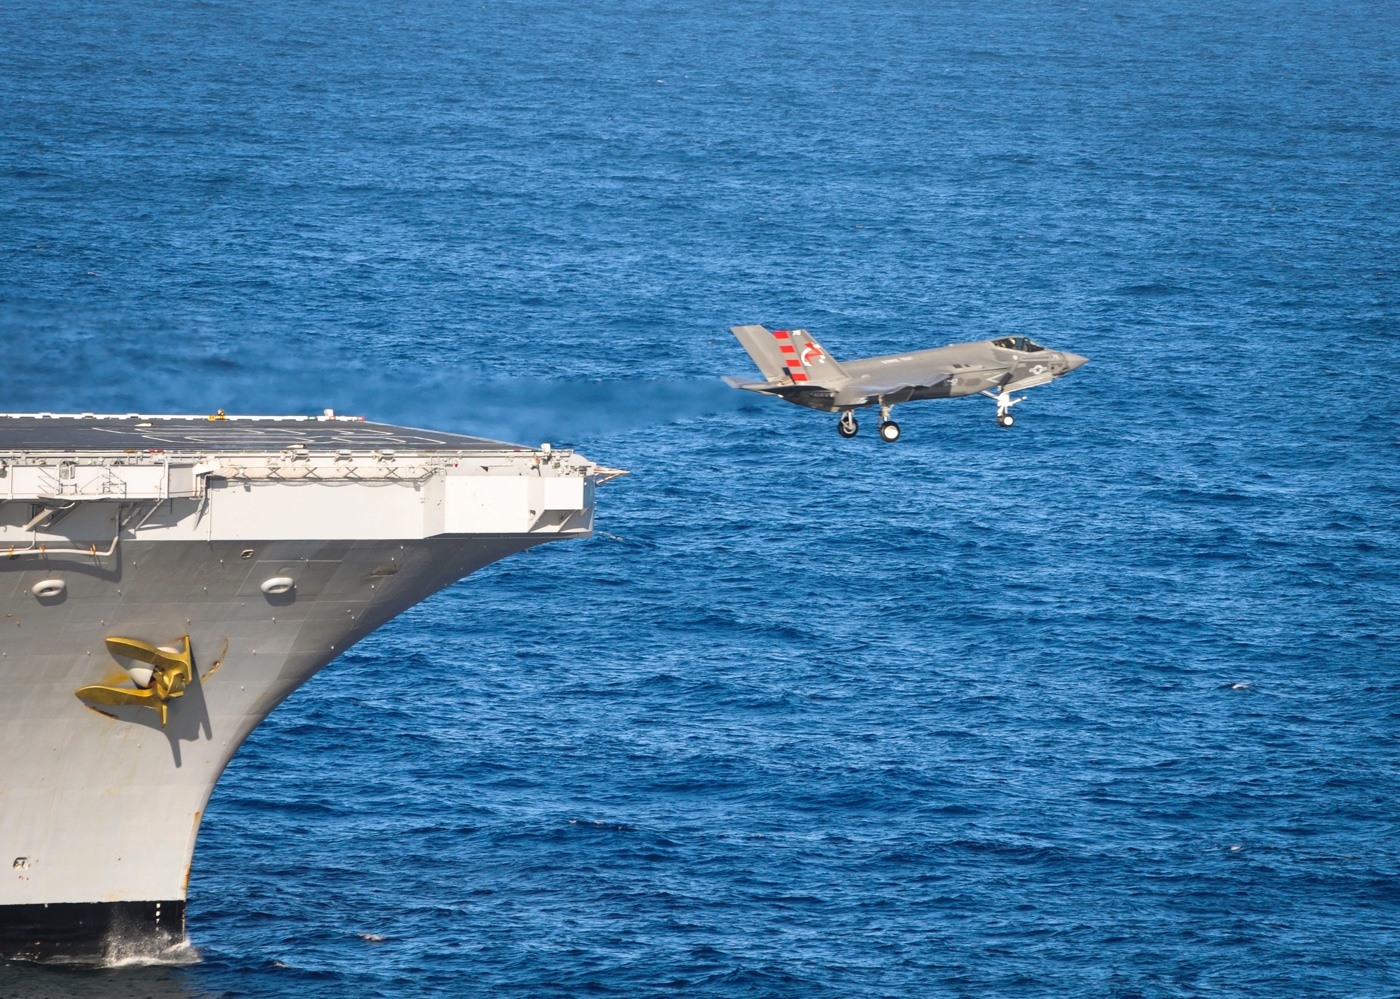 f-35c launching from aircraft carrier